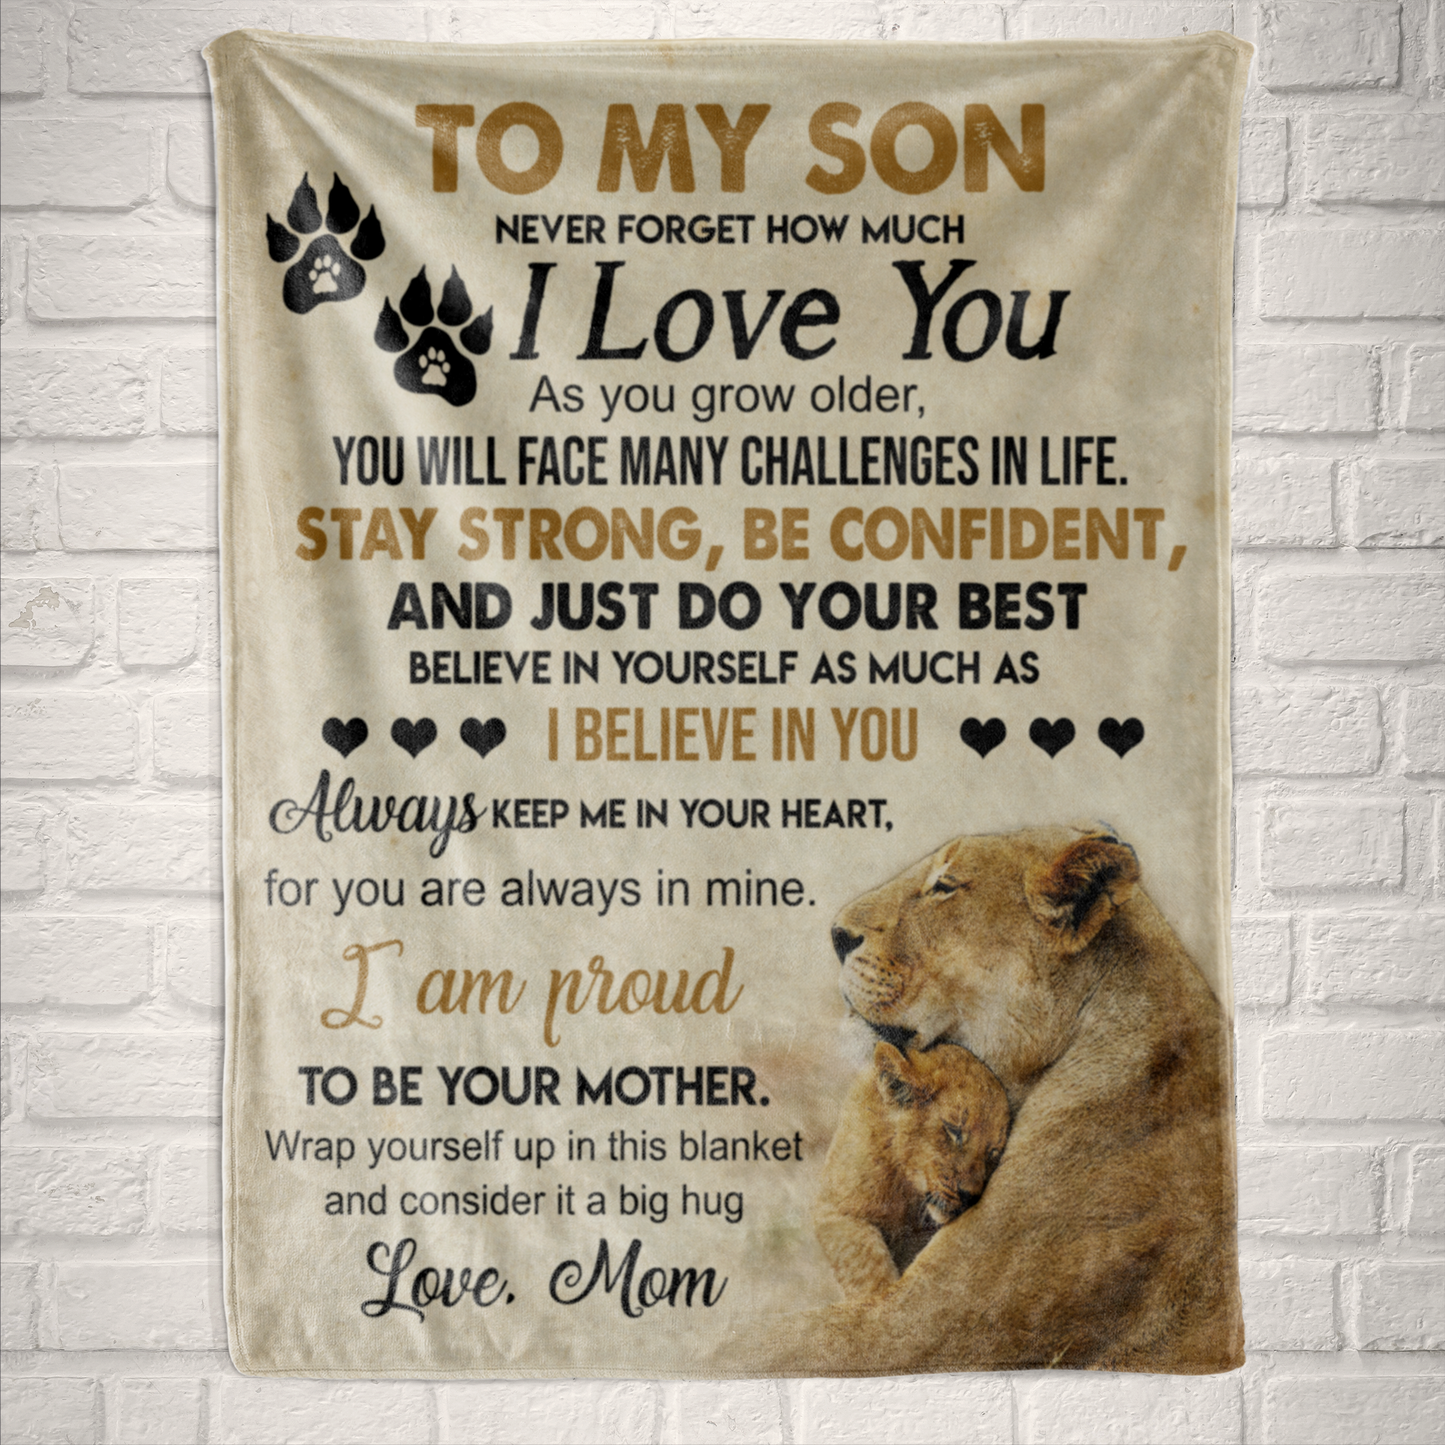 My Son I Believe in You Blanket from Mom